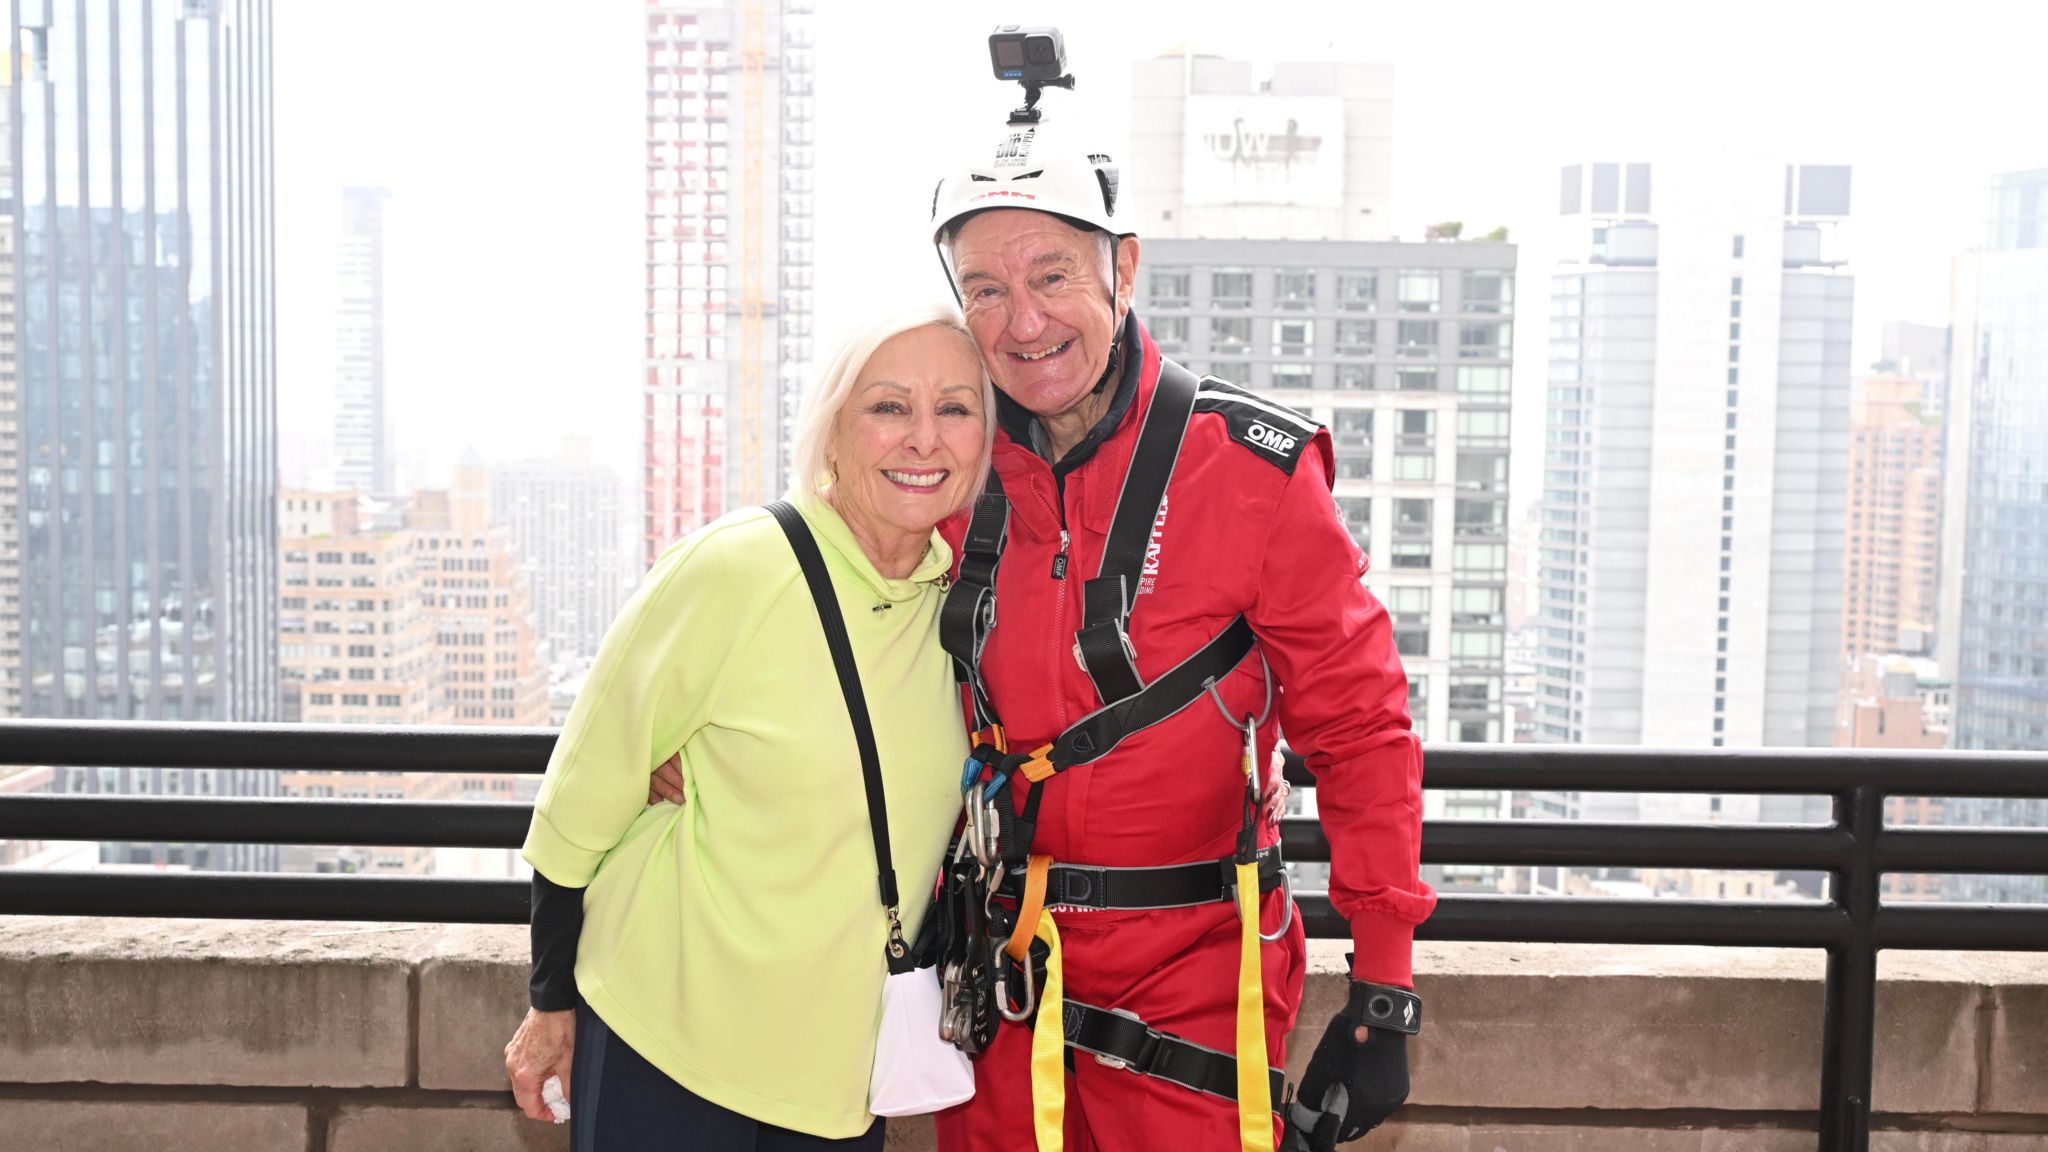 Bill Roberts and wife Maggie on Empire State building